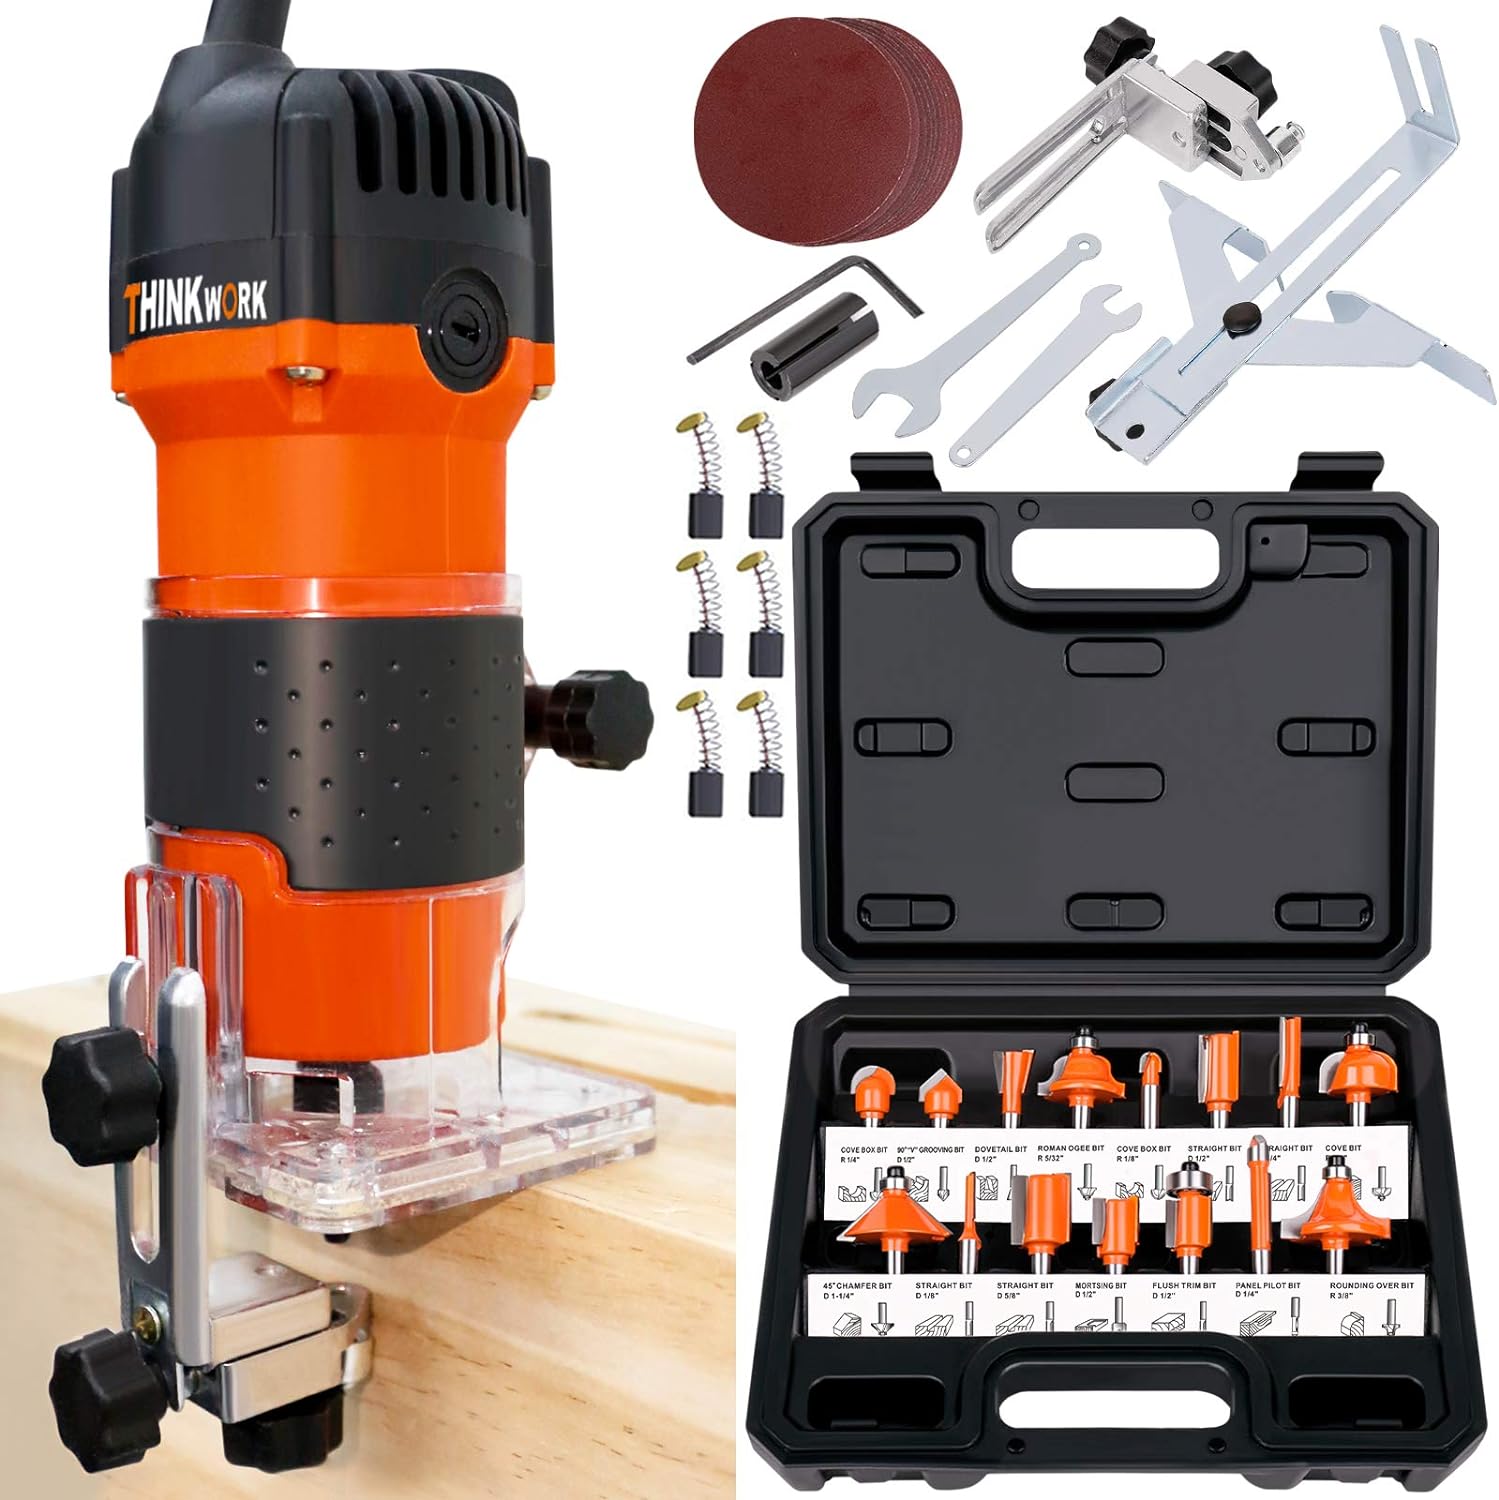 Thinkwork Compact Router, 6.5-Amp 1.25 HP Compact Wood Palm Router Tool Kit, Wood Trimmer with 15 pieces 1/4" Router Bits Set, 30000